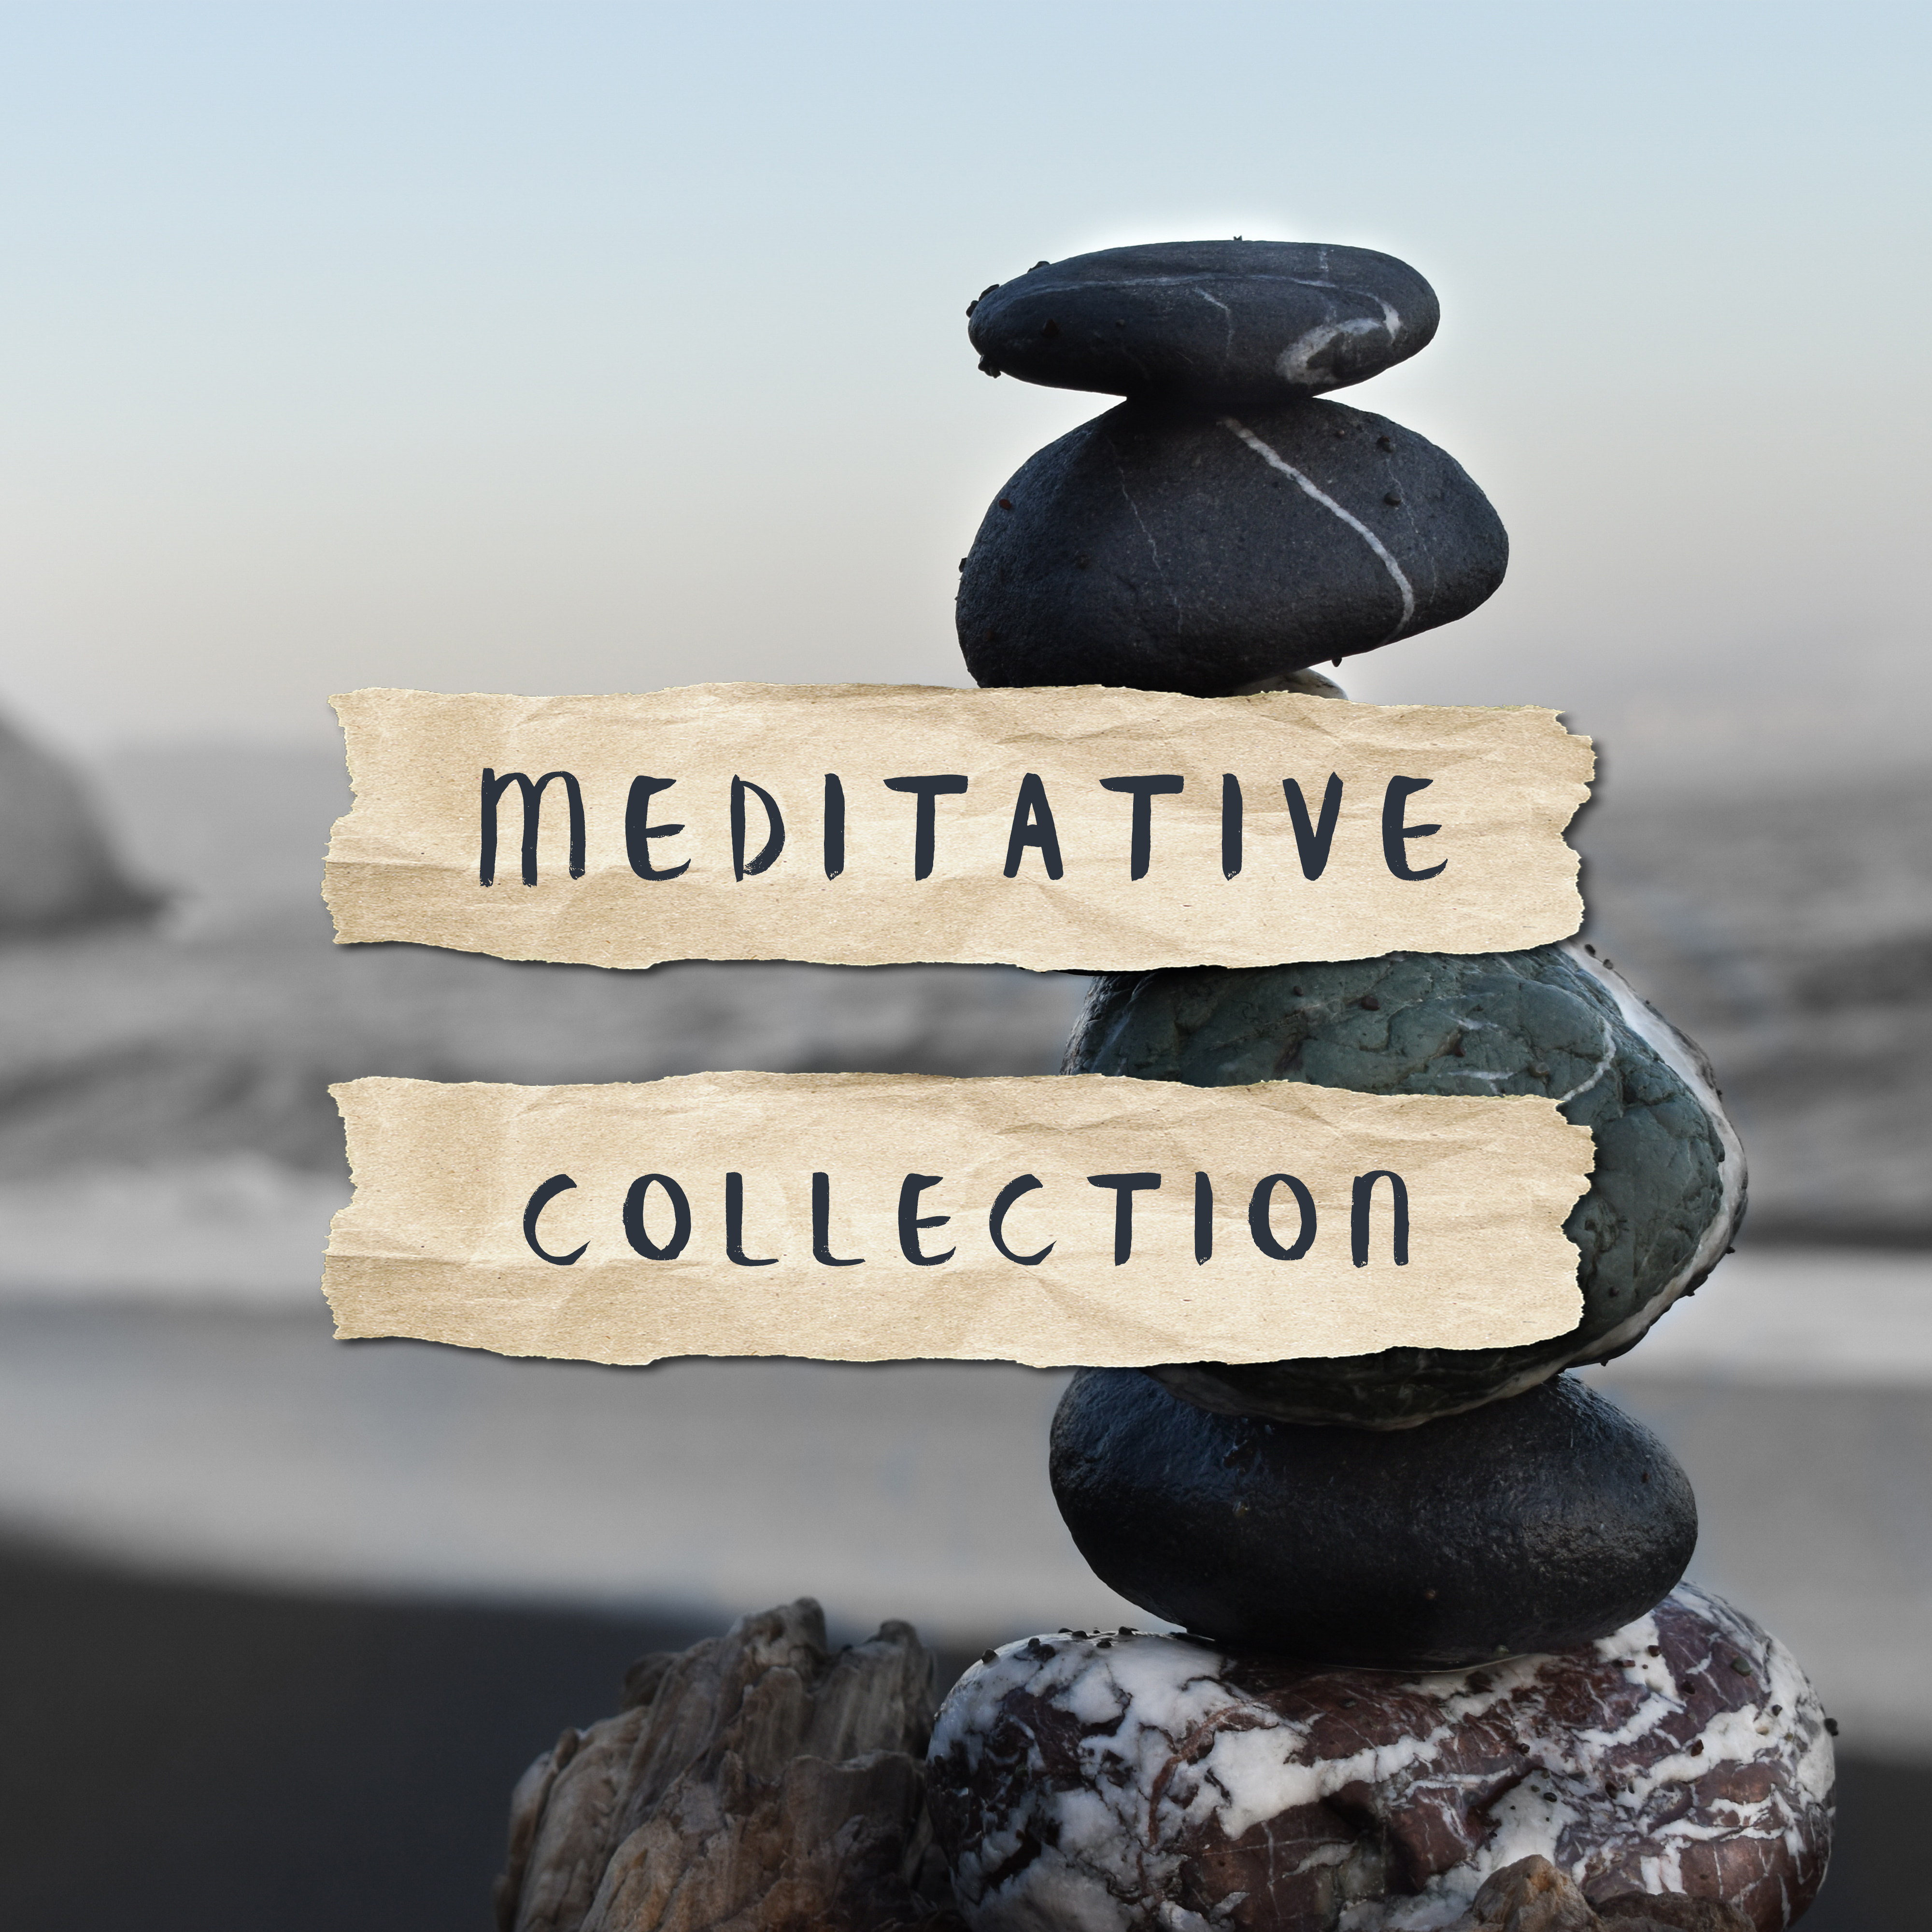 Meditative Collection: 15 Best Songs for Meditation and Contemplation